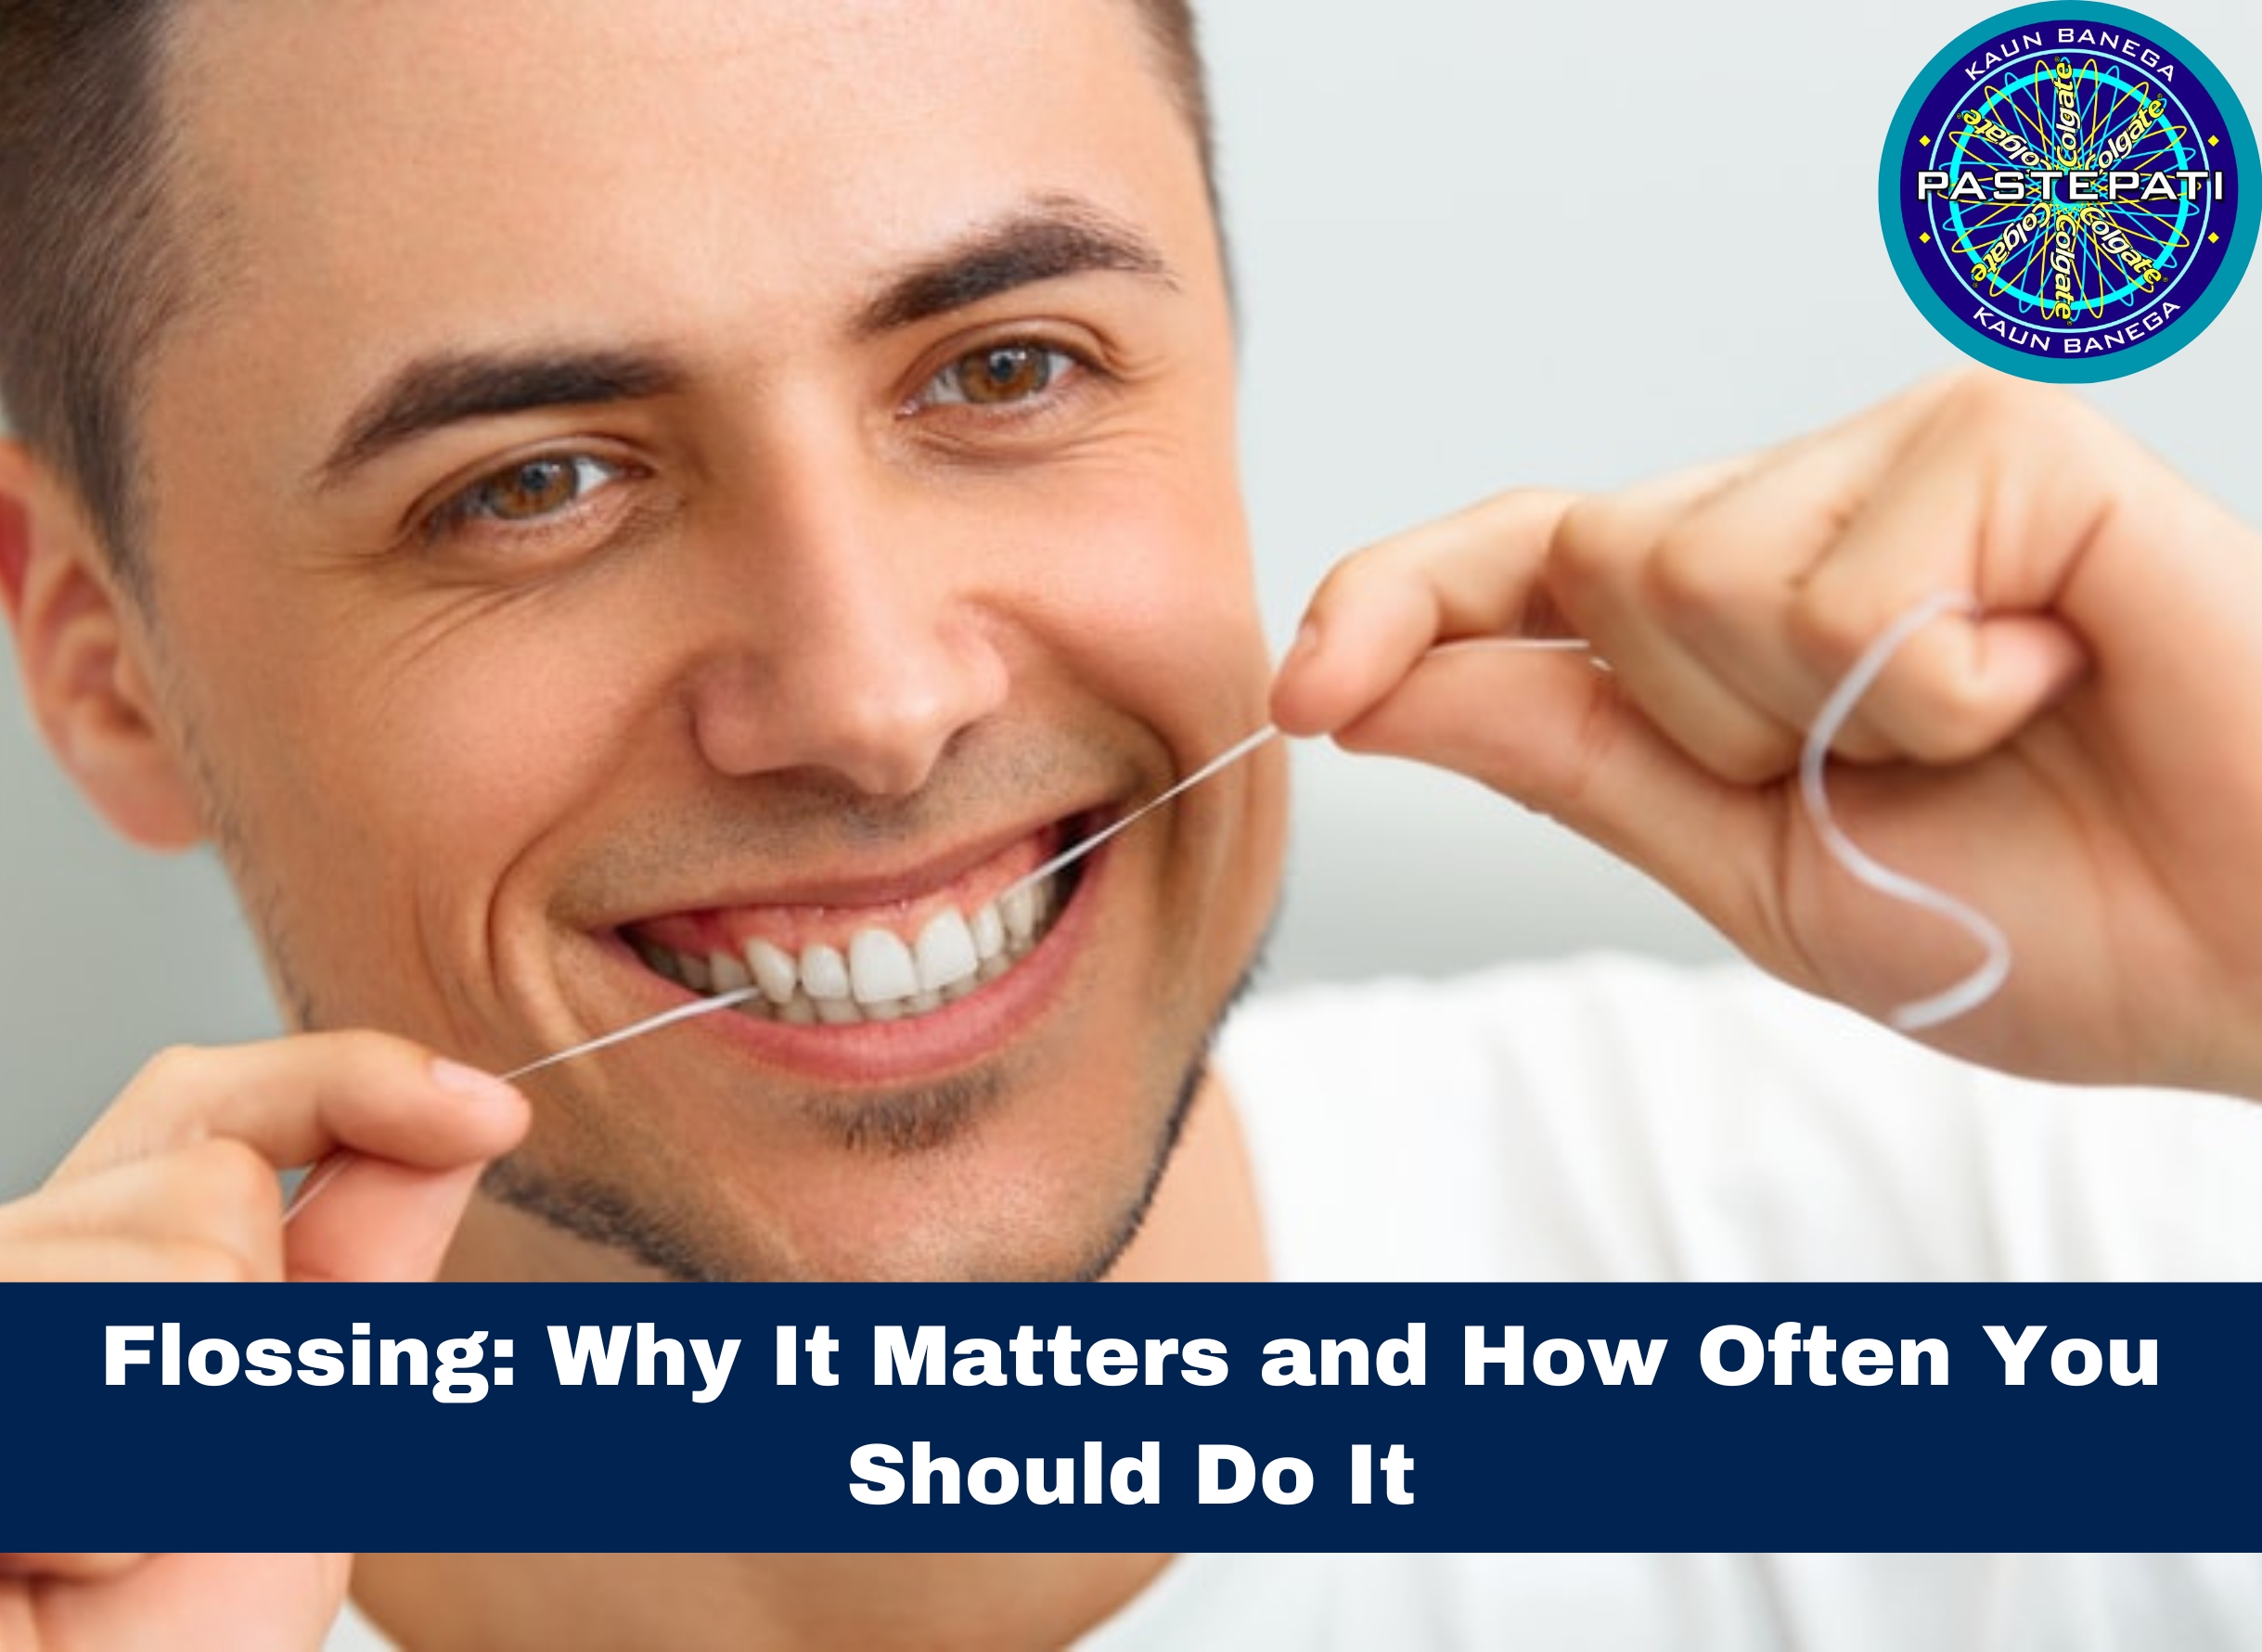 Flossing: Why It Matters and How Often You Should Do It